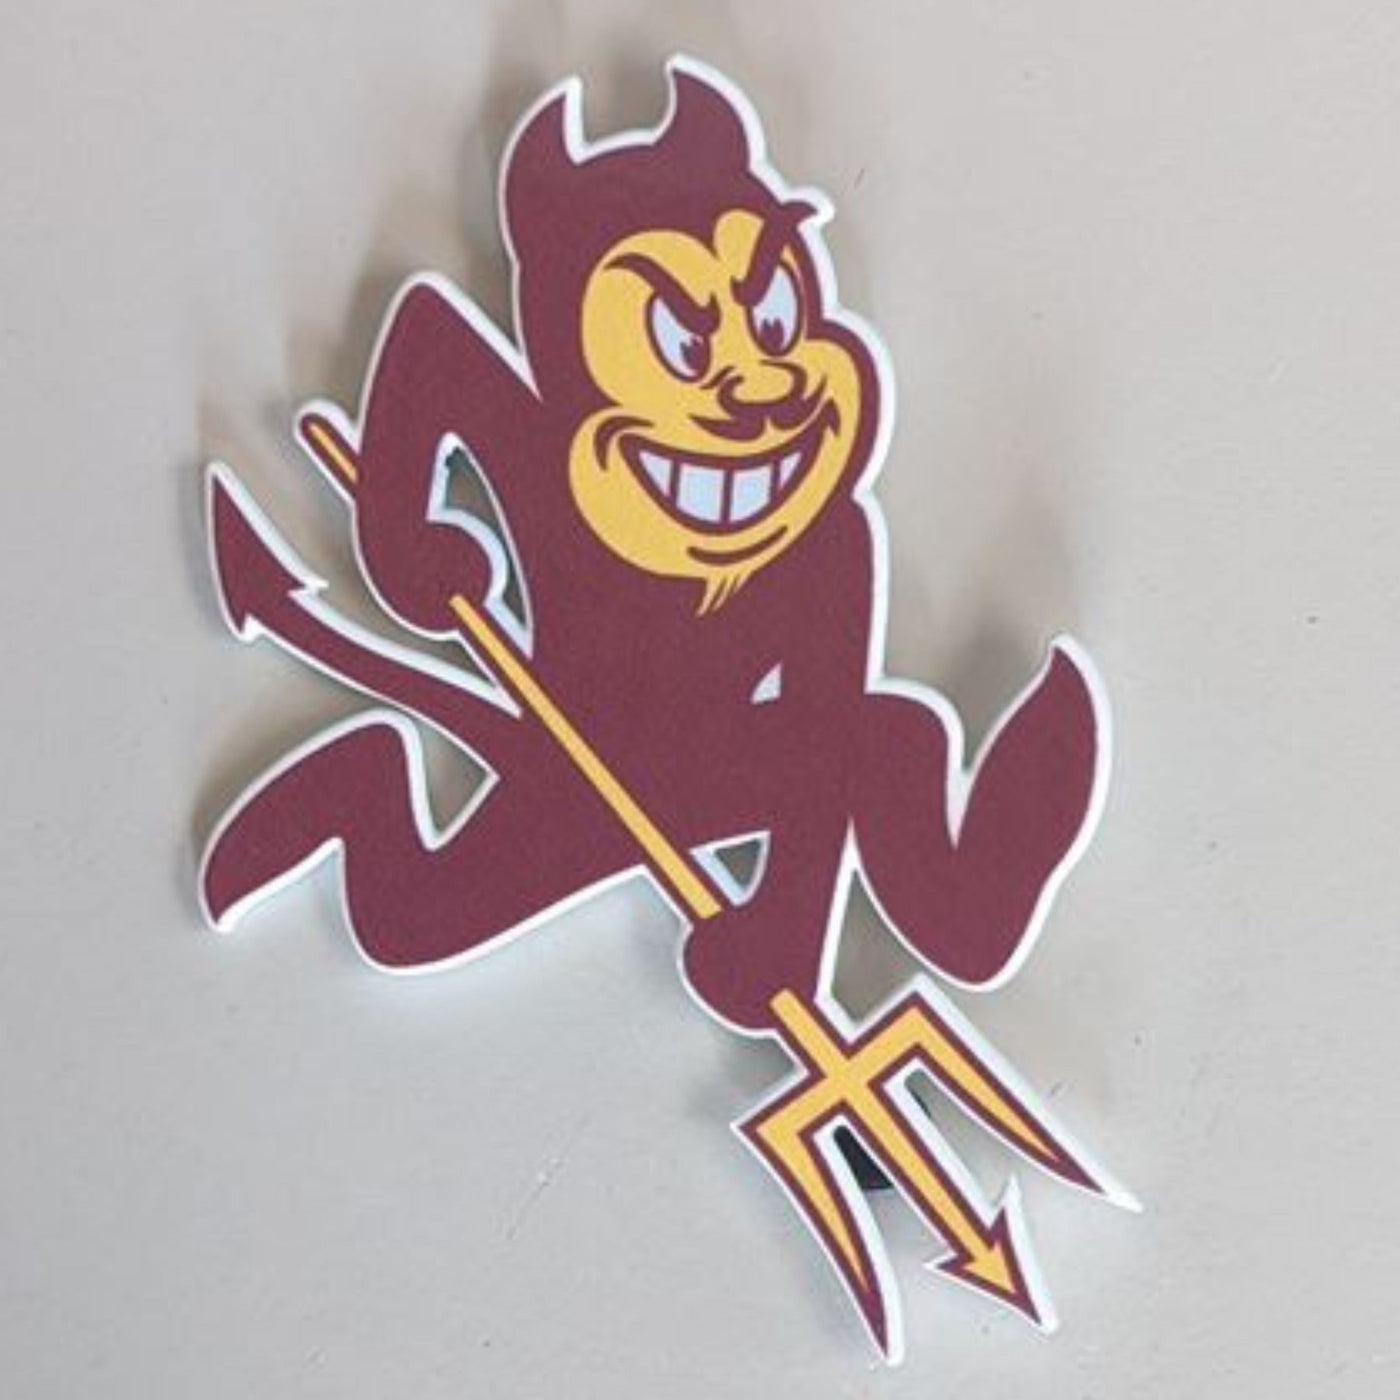 ASU Sparky Steel Magnet in maroon and gold with white outline